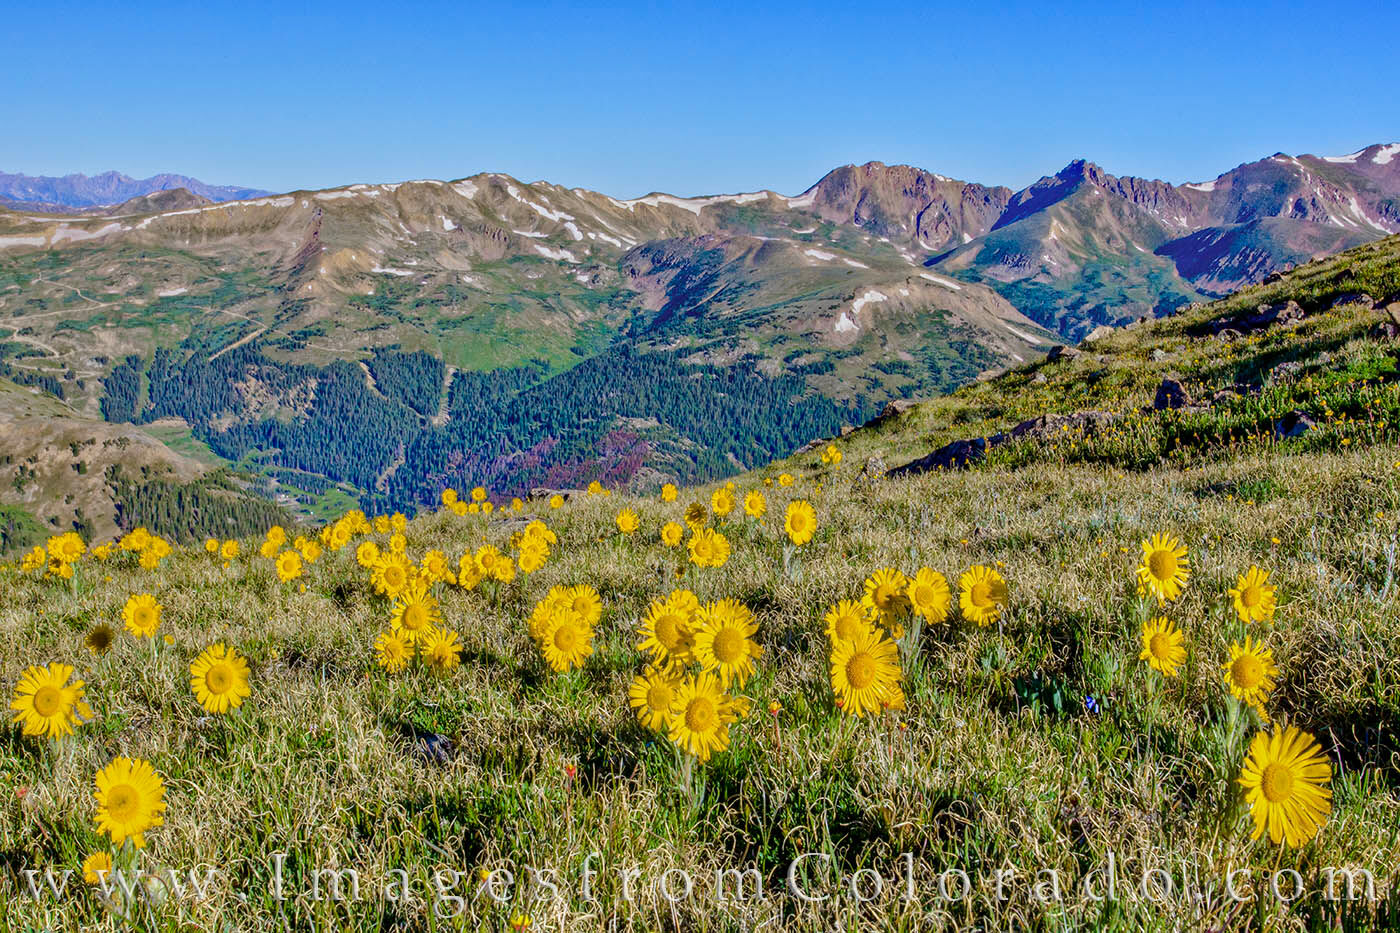 Near the top of Loveland Pass, just a few miles up the road from Breckenridge, there are several 13ers you can hike. Along one...